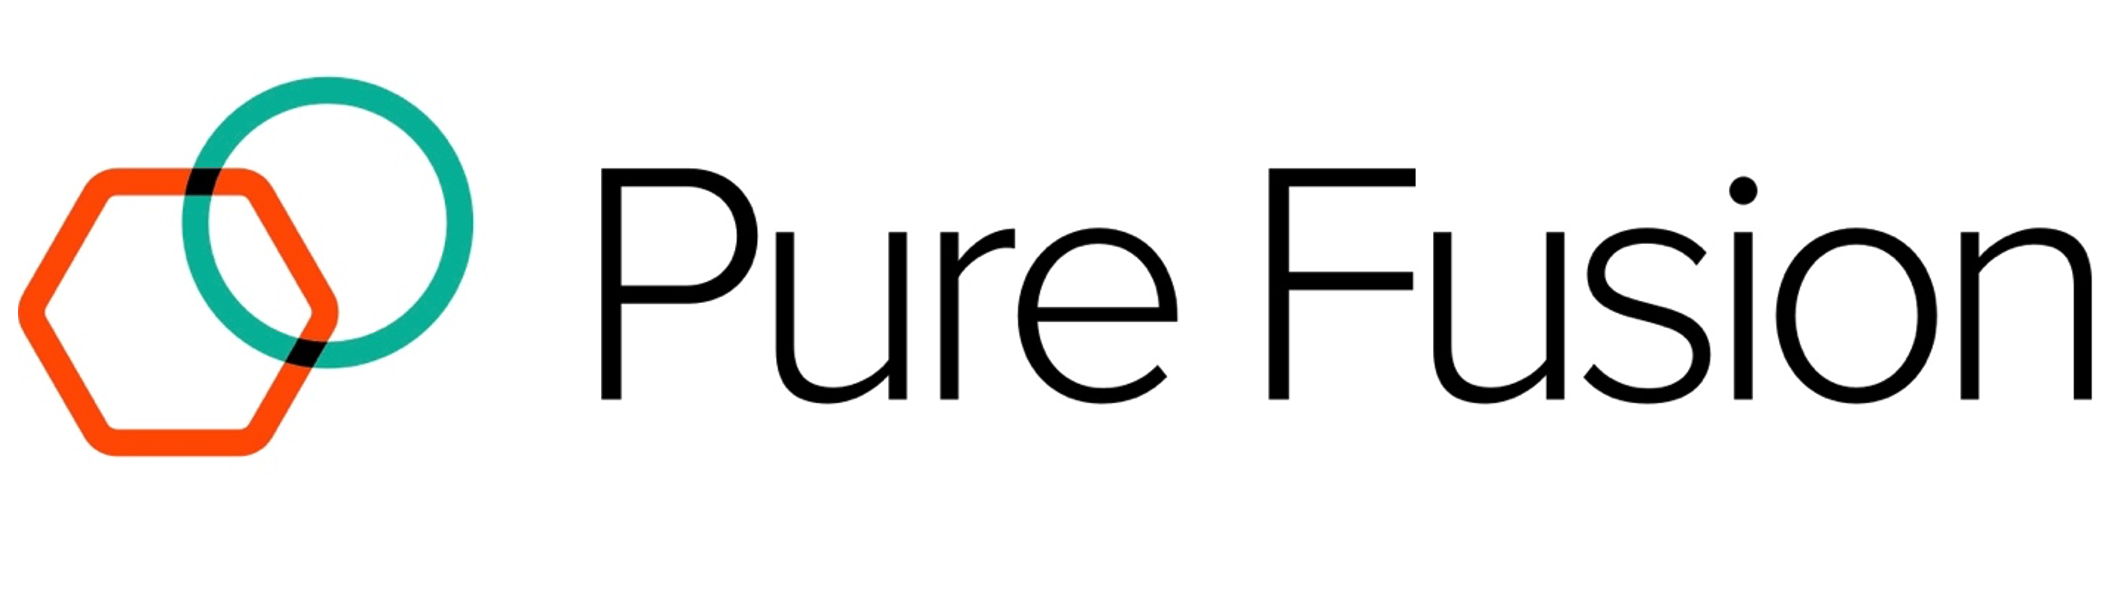 Pure Storage logo in transparent PNG and vectorized SVG formats